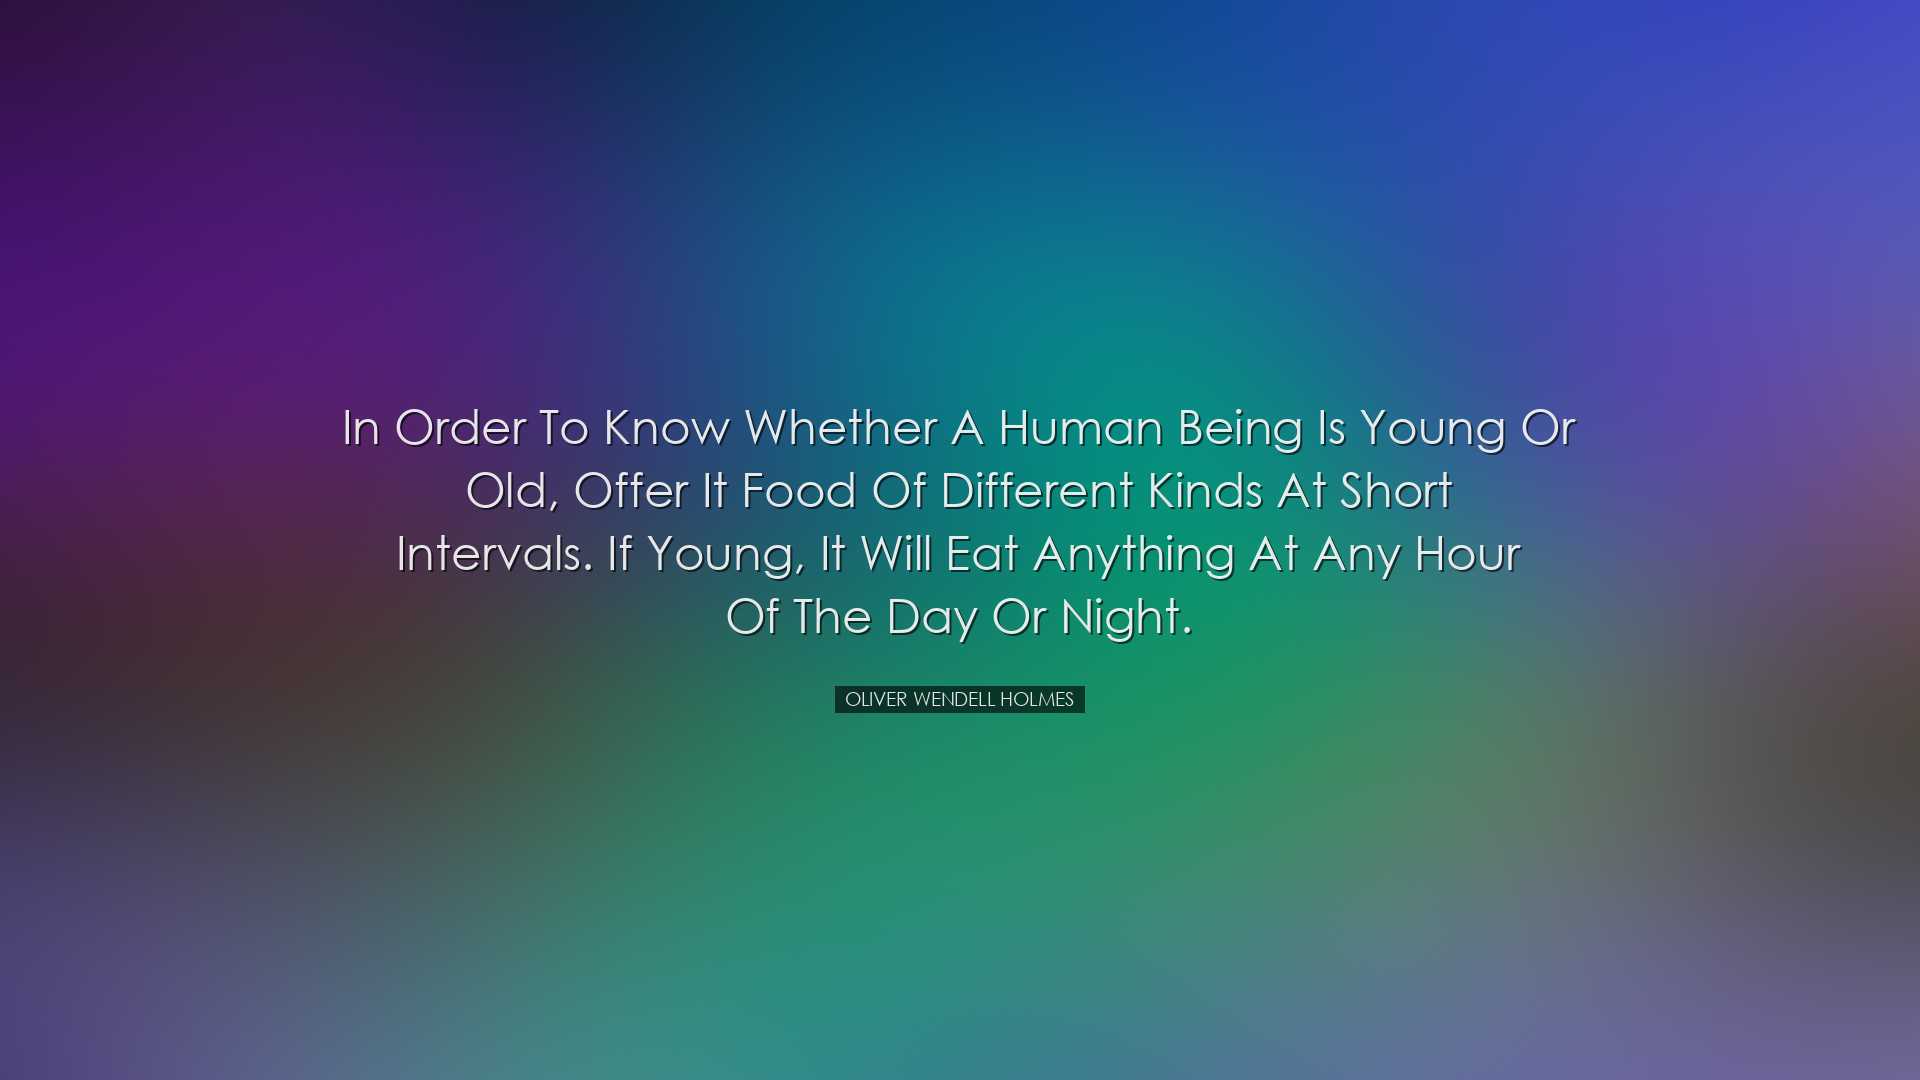 In order to know whether a human being is young or old, offer it f